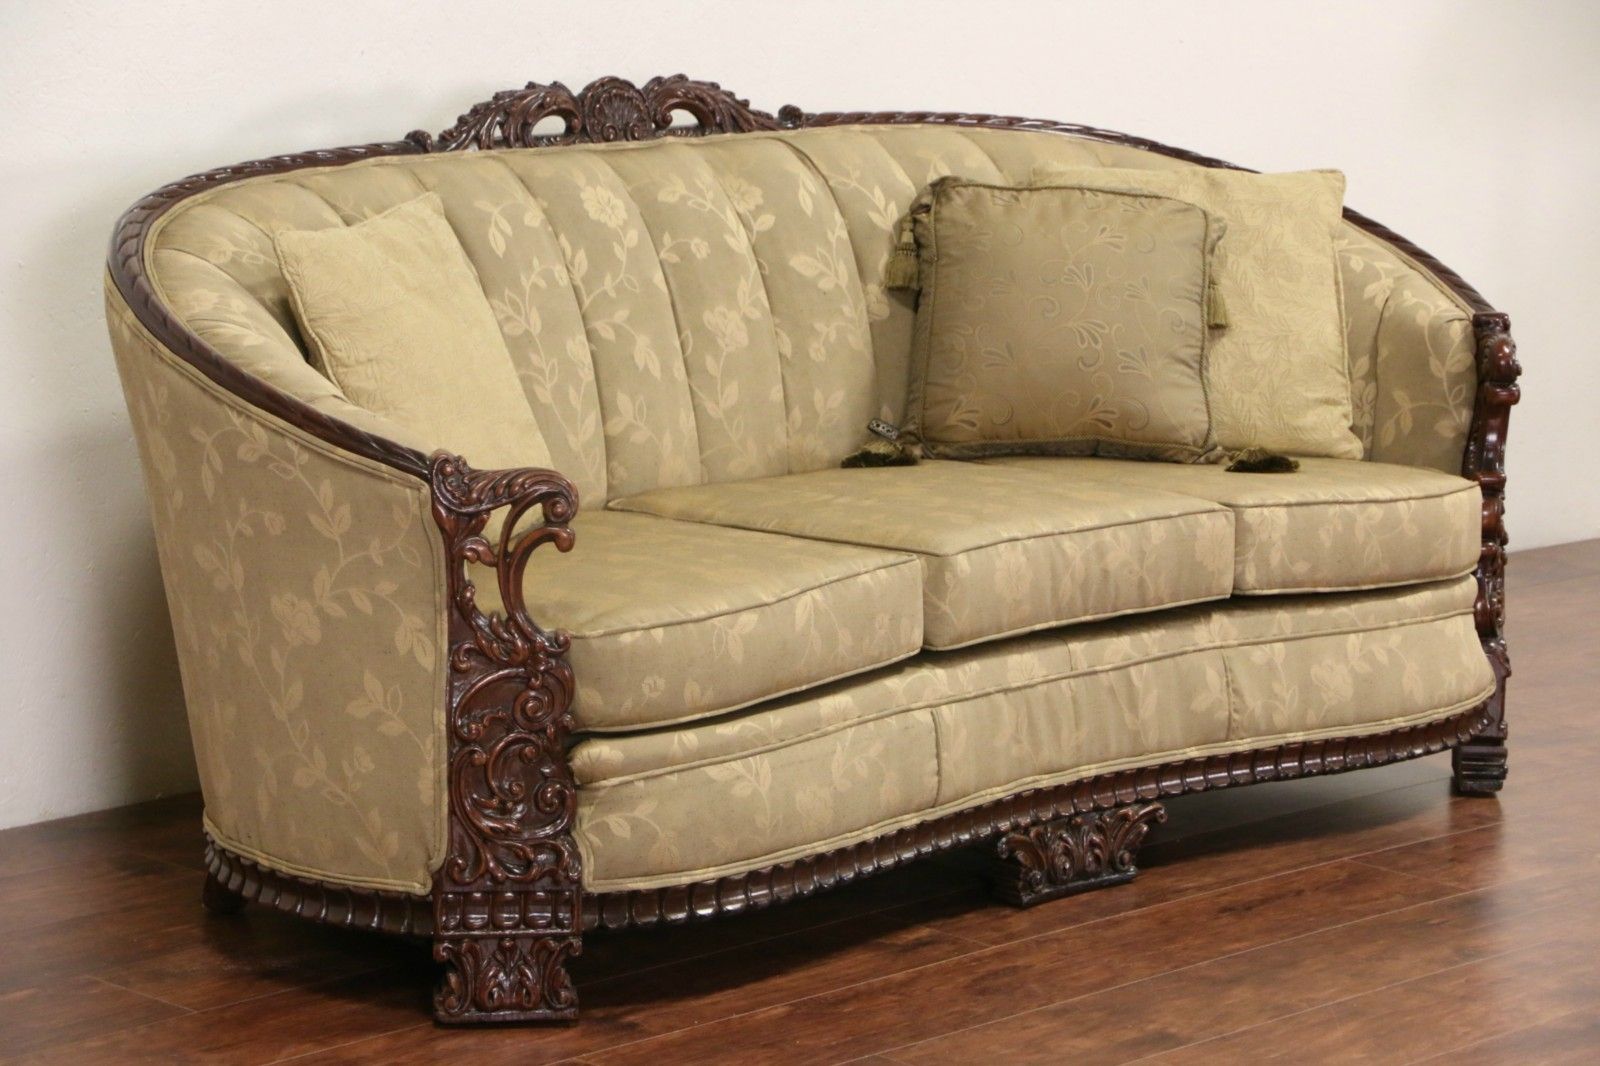 Sold Carved Sofa Club Chair Set 1930s Vintage New Pertaining To 1930s Sofas (View 15 of 15)